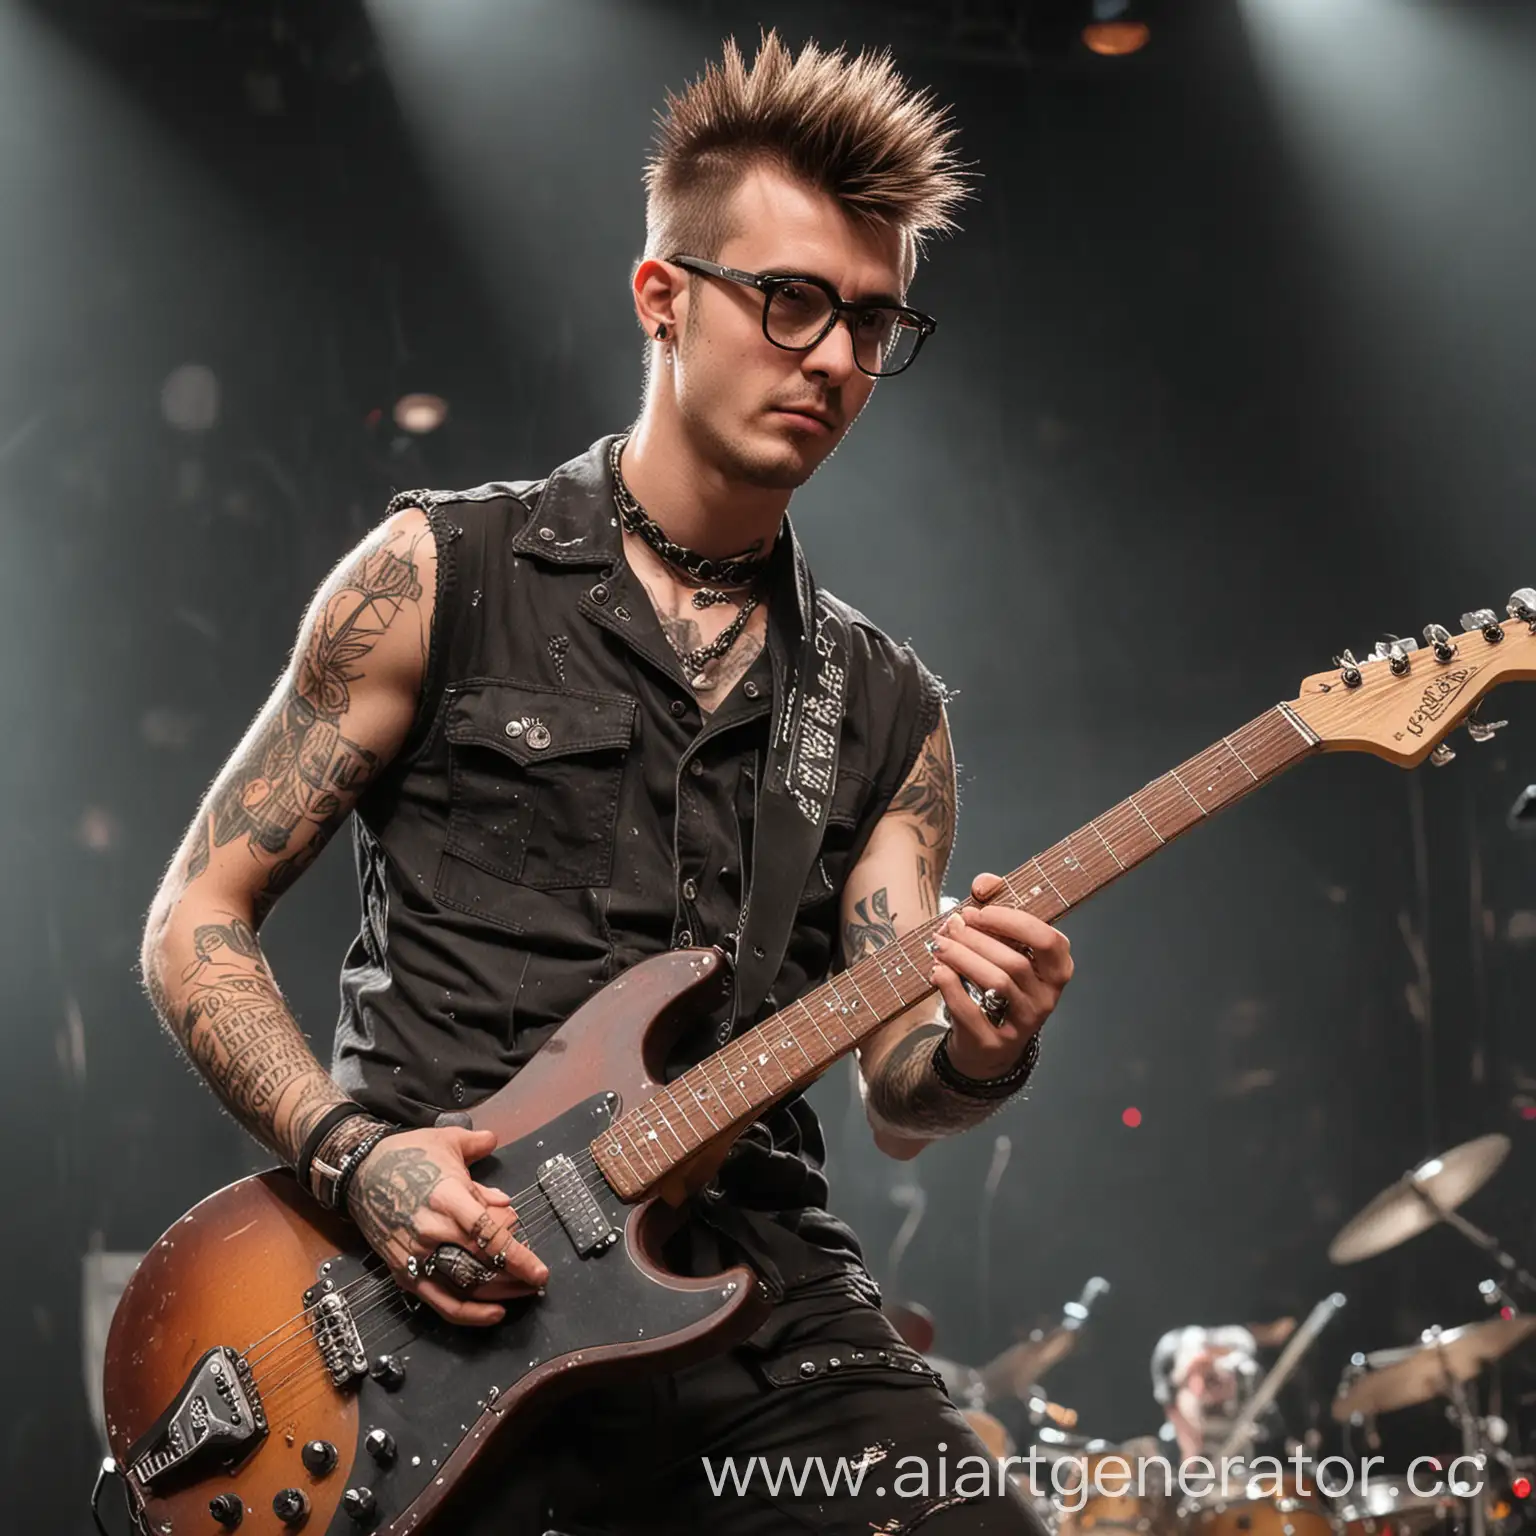 Rockstar-Punk-Guitarist-Performing-with-Glasses-On-Stage